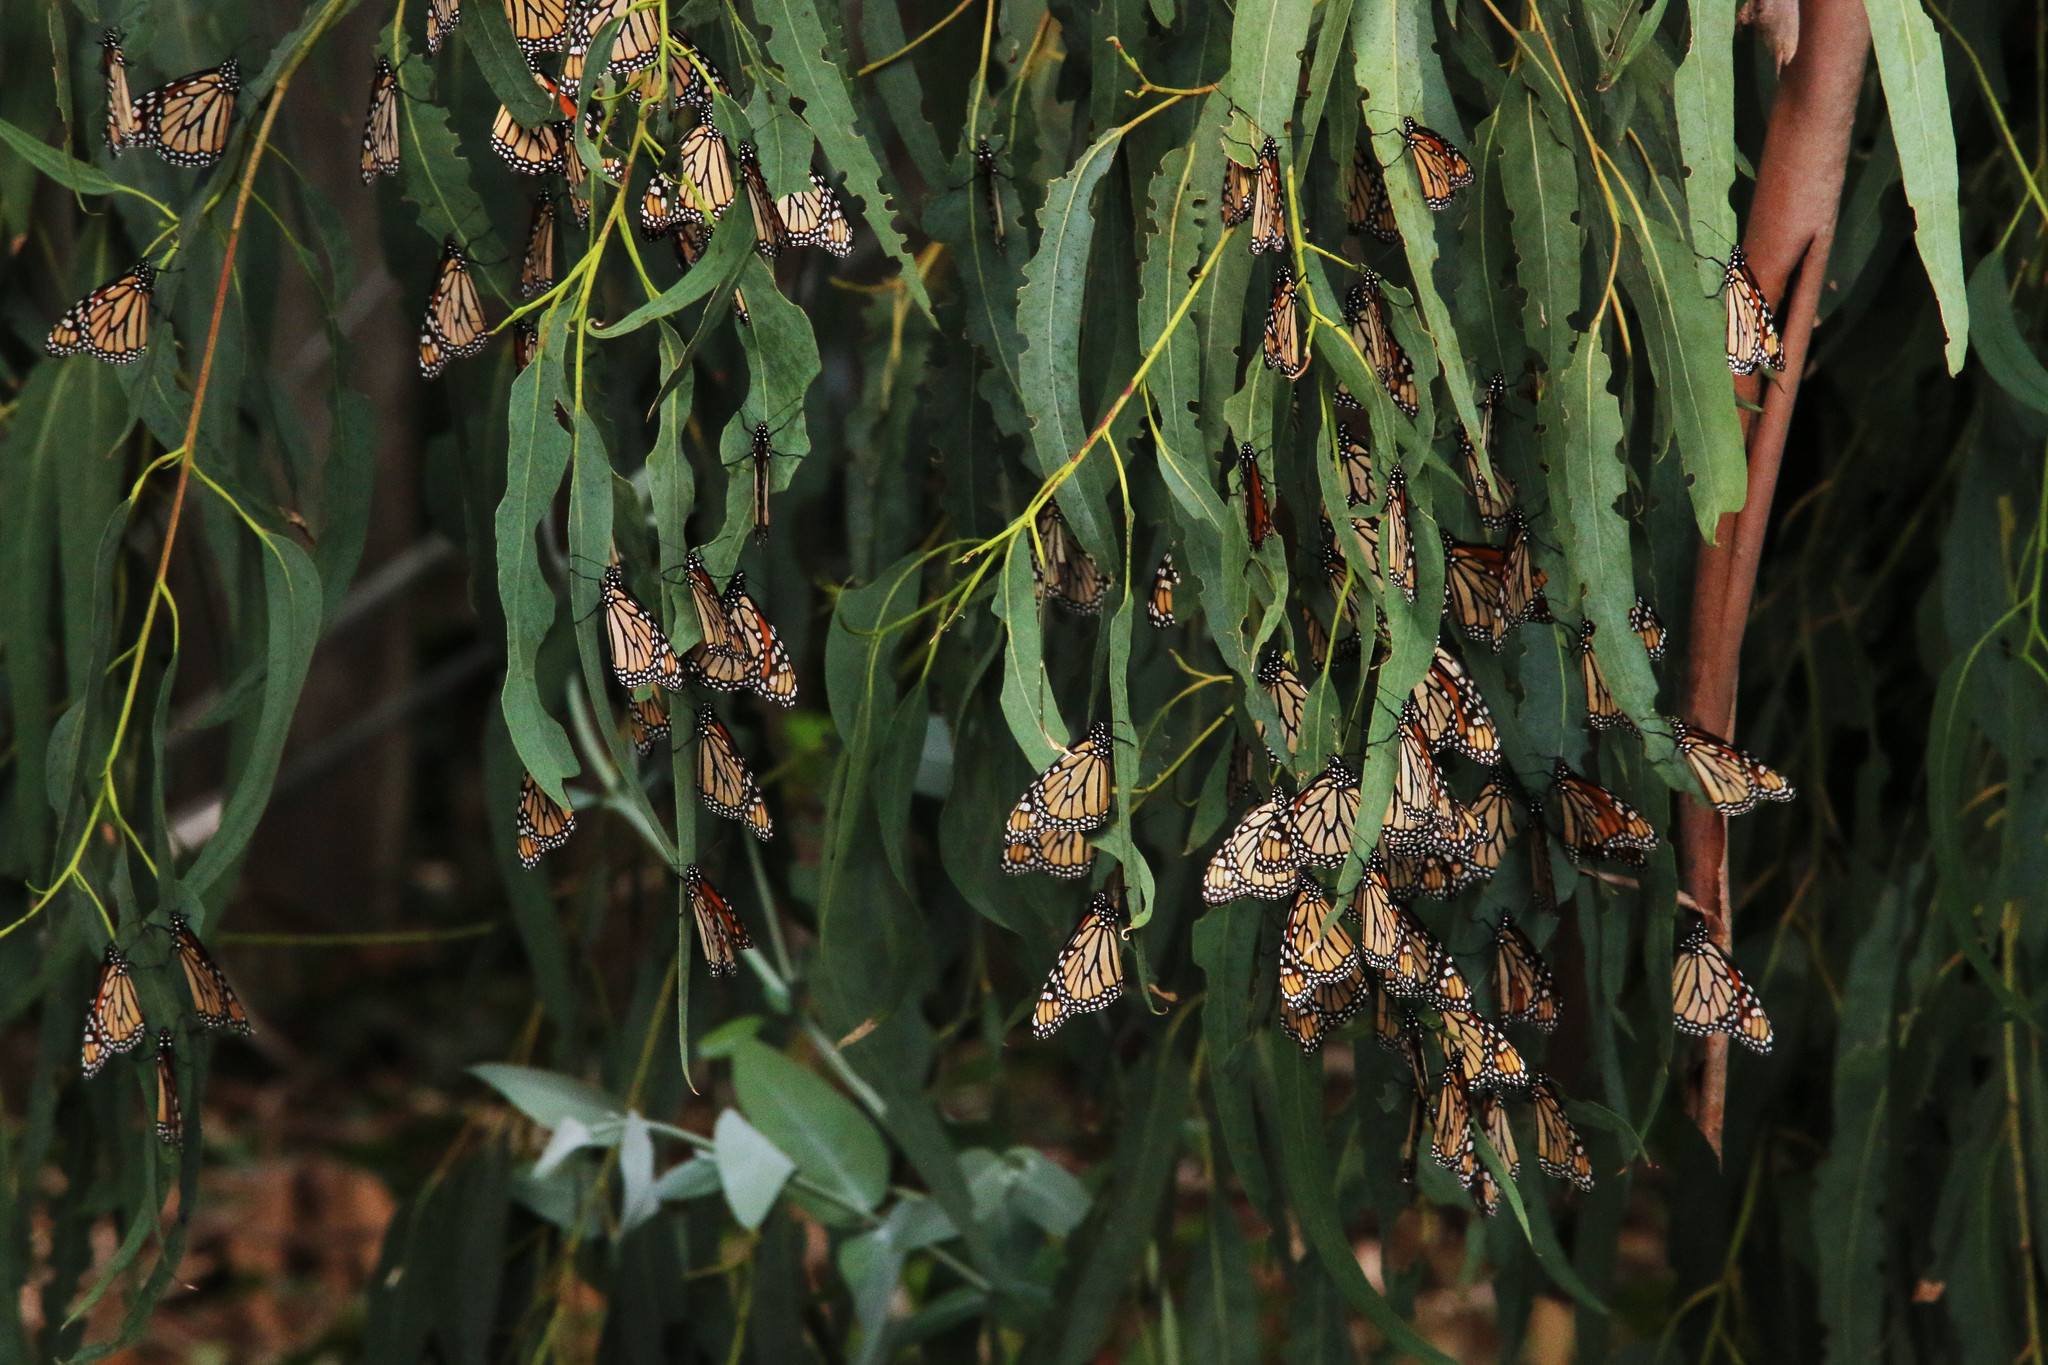 Monarchs Roosting on a Eucalyptus Tree